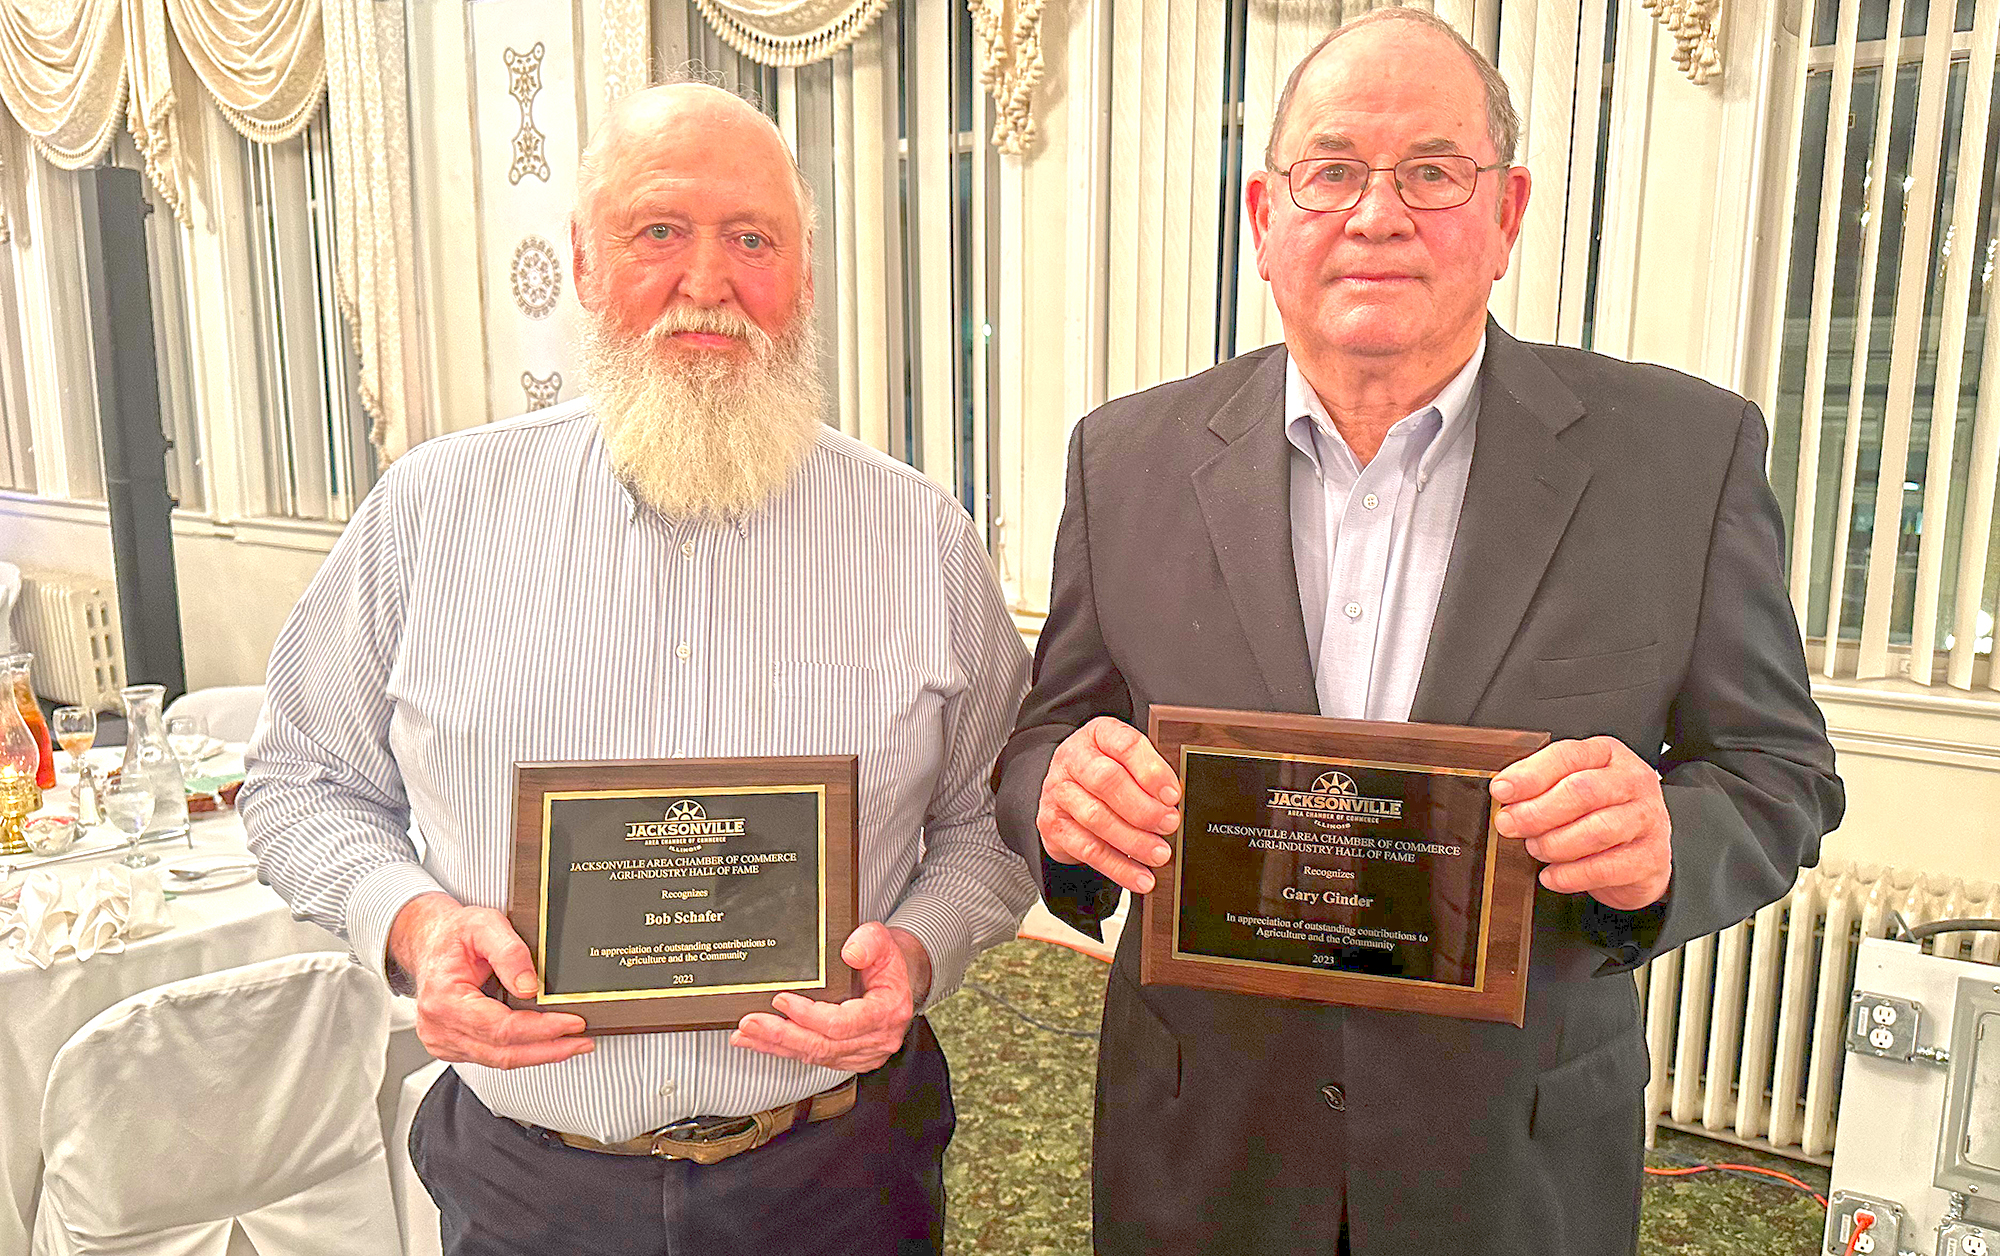 Chamber inducts Ginder, Schafer into agriculture corridor of fame